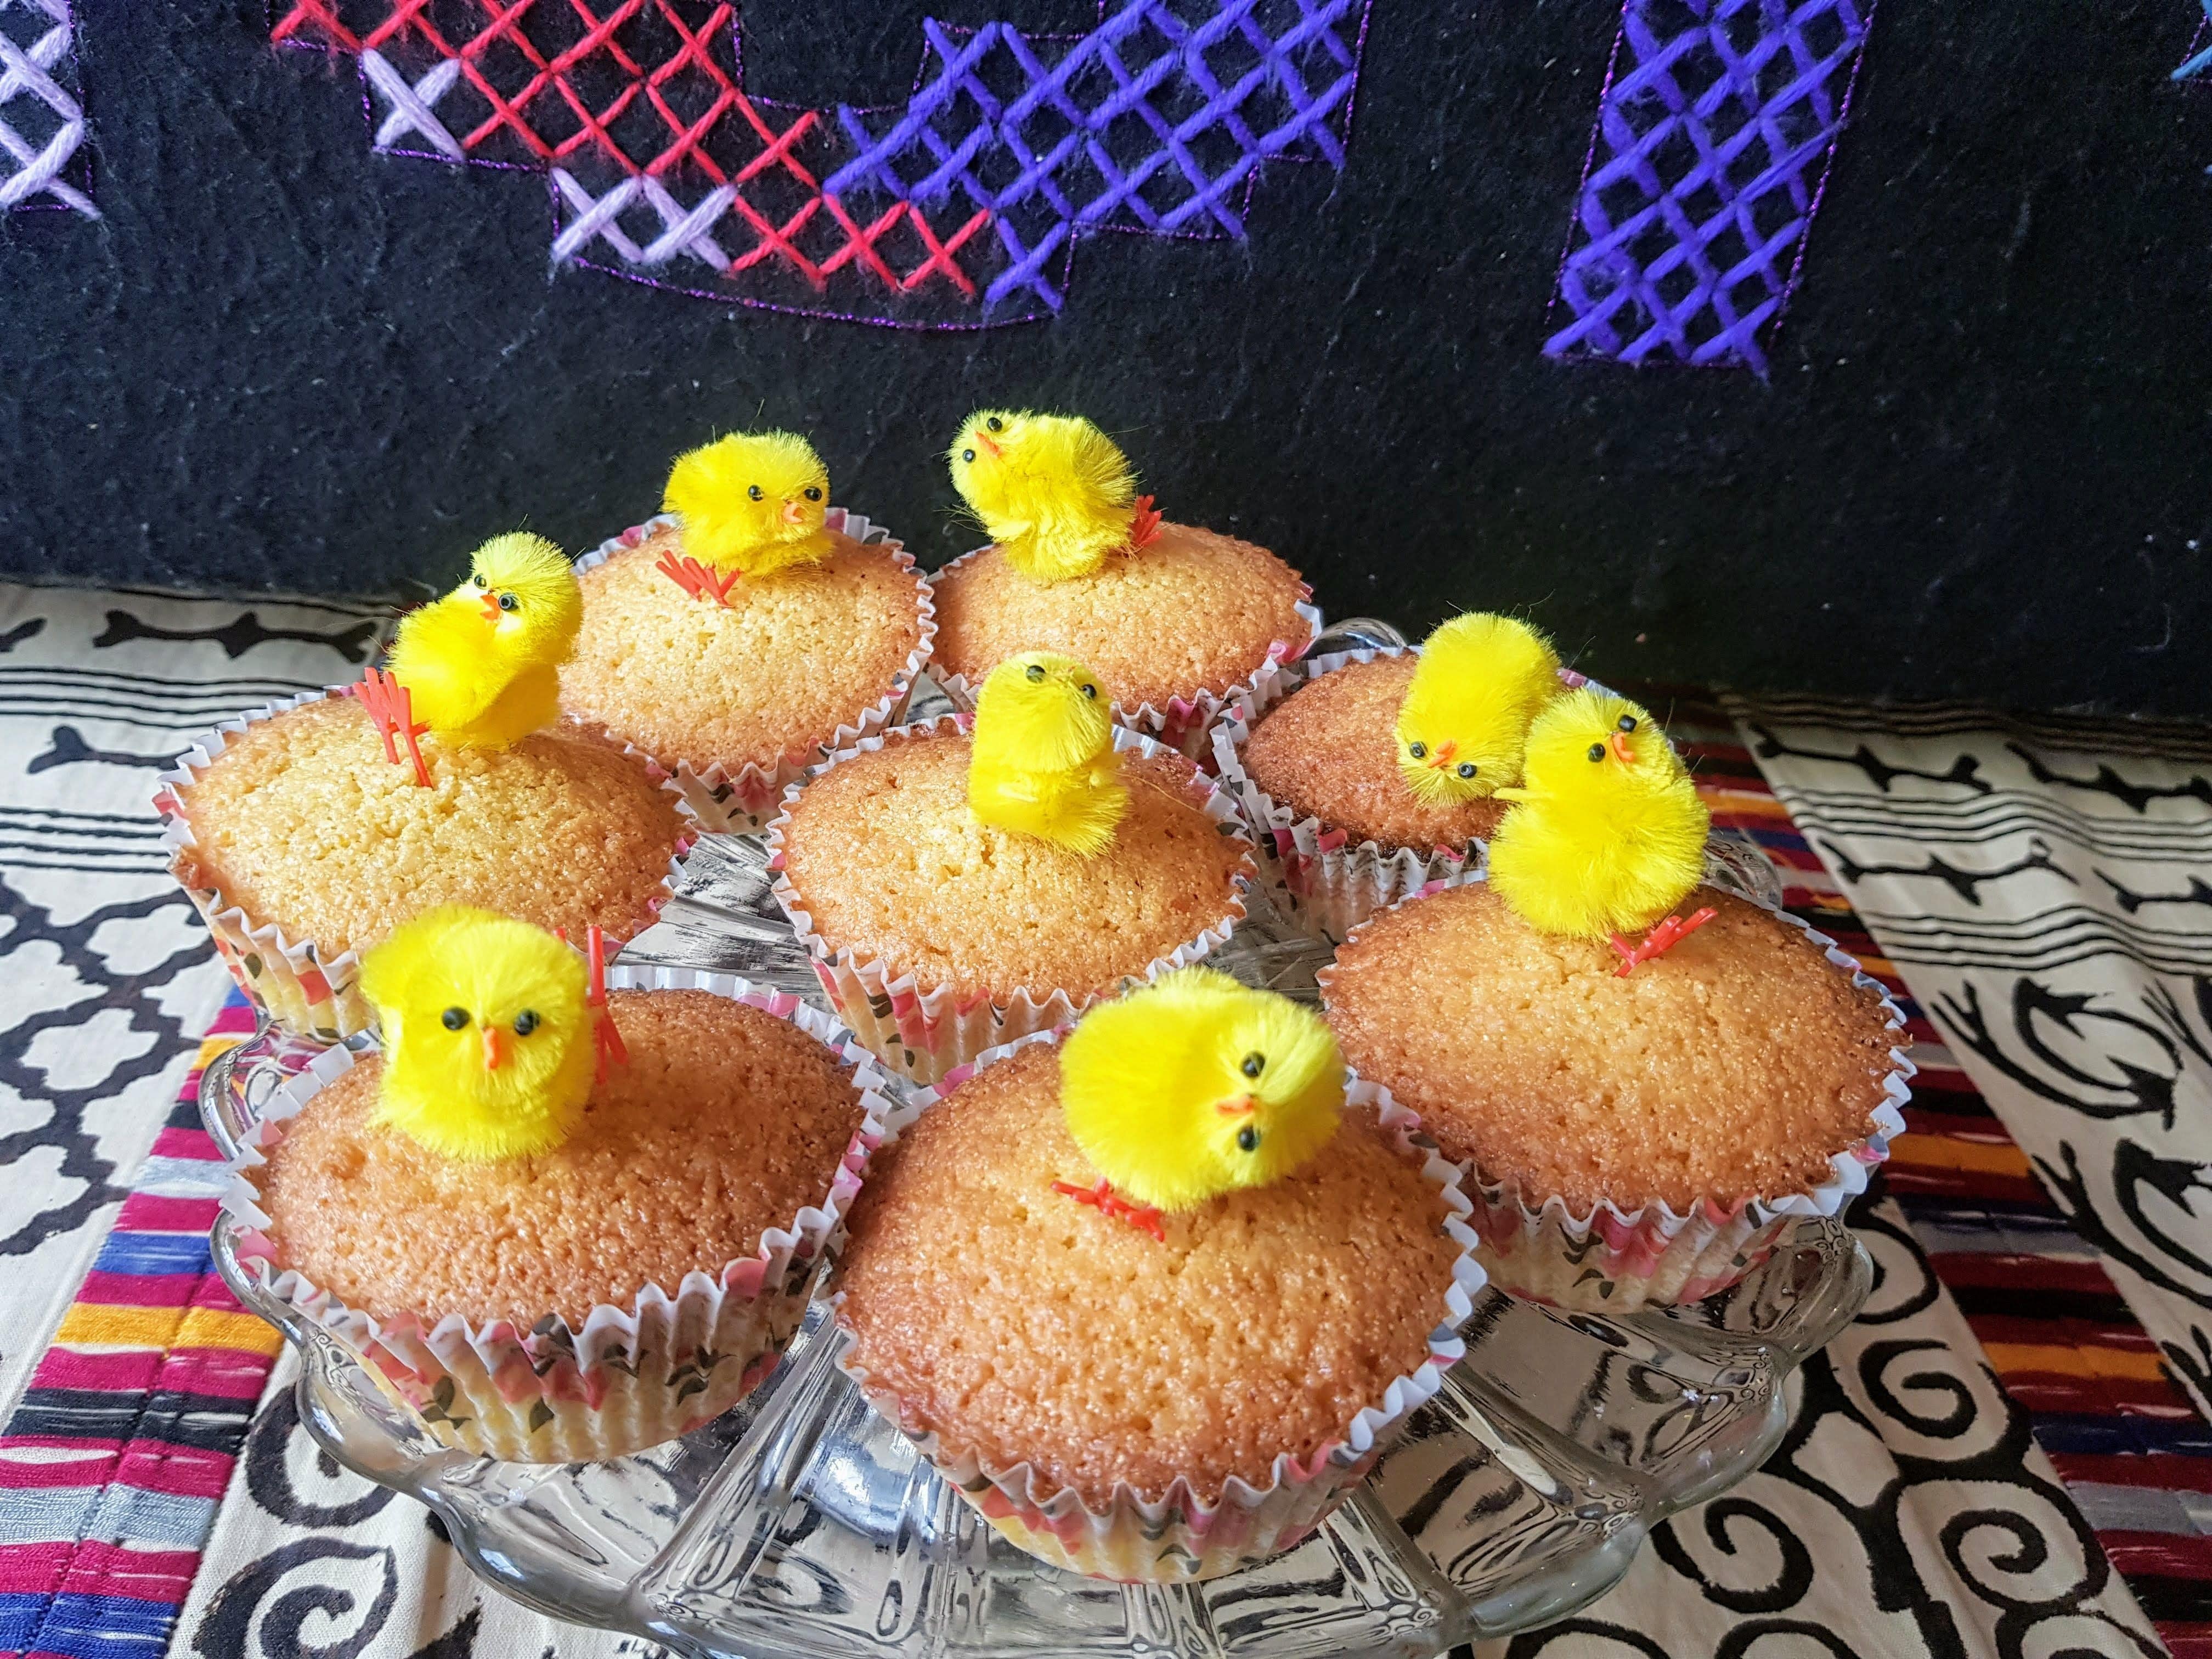 Fairy cakes decorated with little Easter chicks